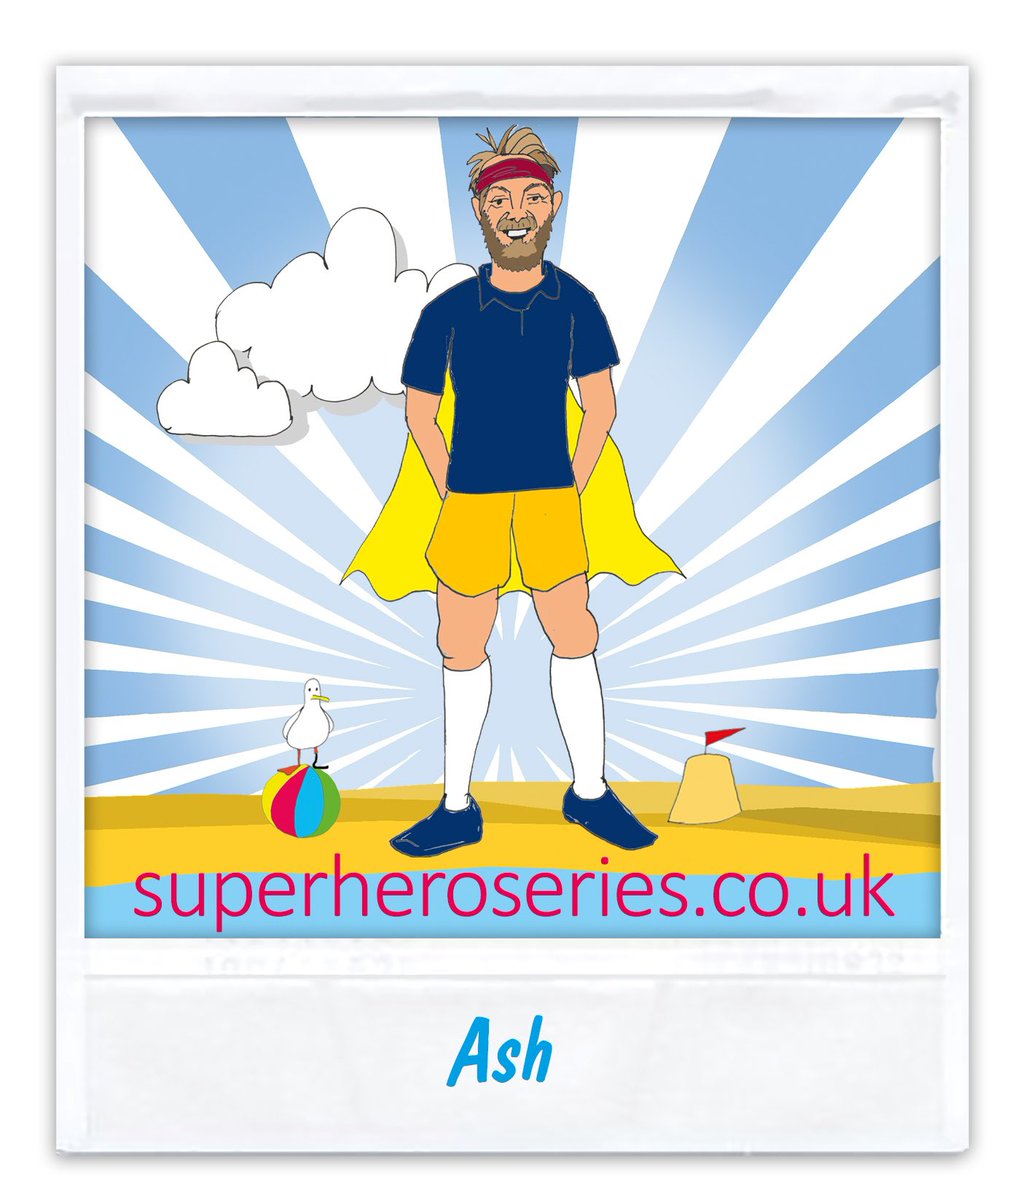 KAPOW! This Series is for all the unsung Superheroes who boldly face what life throws at them & you can't get more SUPER than Ash. This former military machine has unbelievable determination & a belly laugh to match. KABOOM!  superheroseries.co.uk @WeAreInvictus @HelpforHeroes